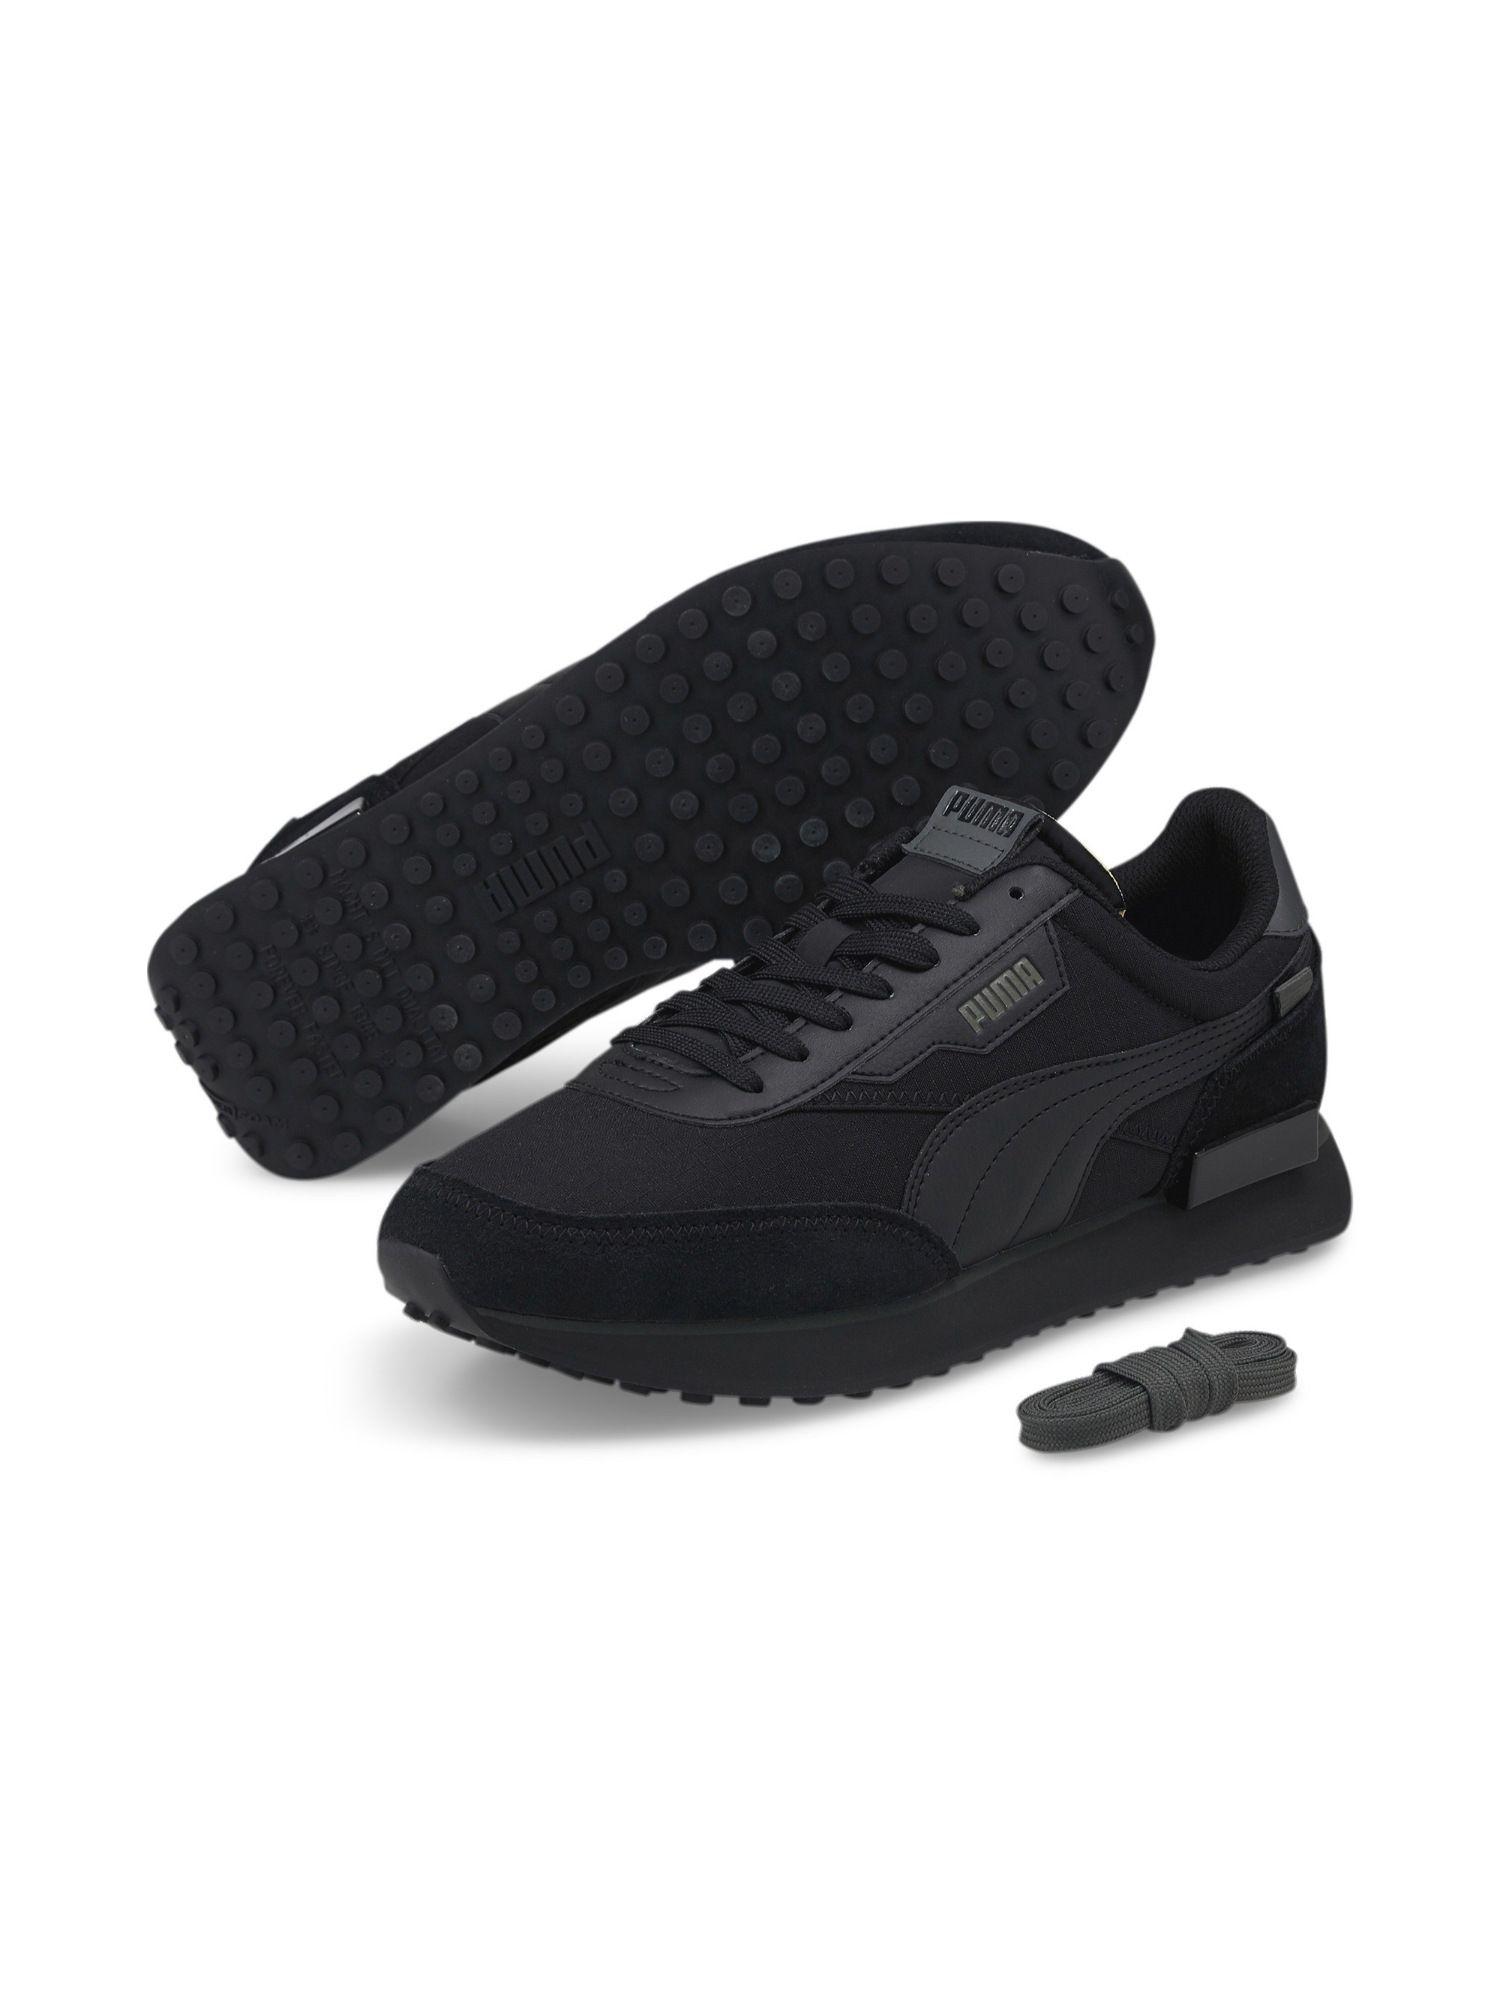 Future Rider Play On Mens Black Sneakers